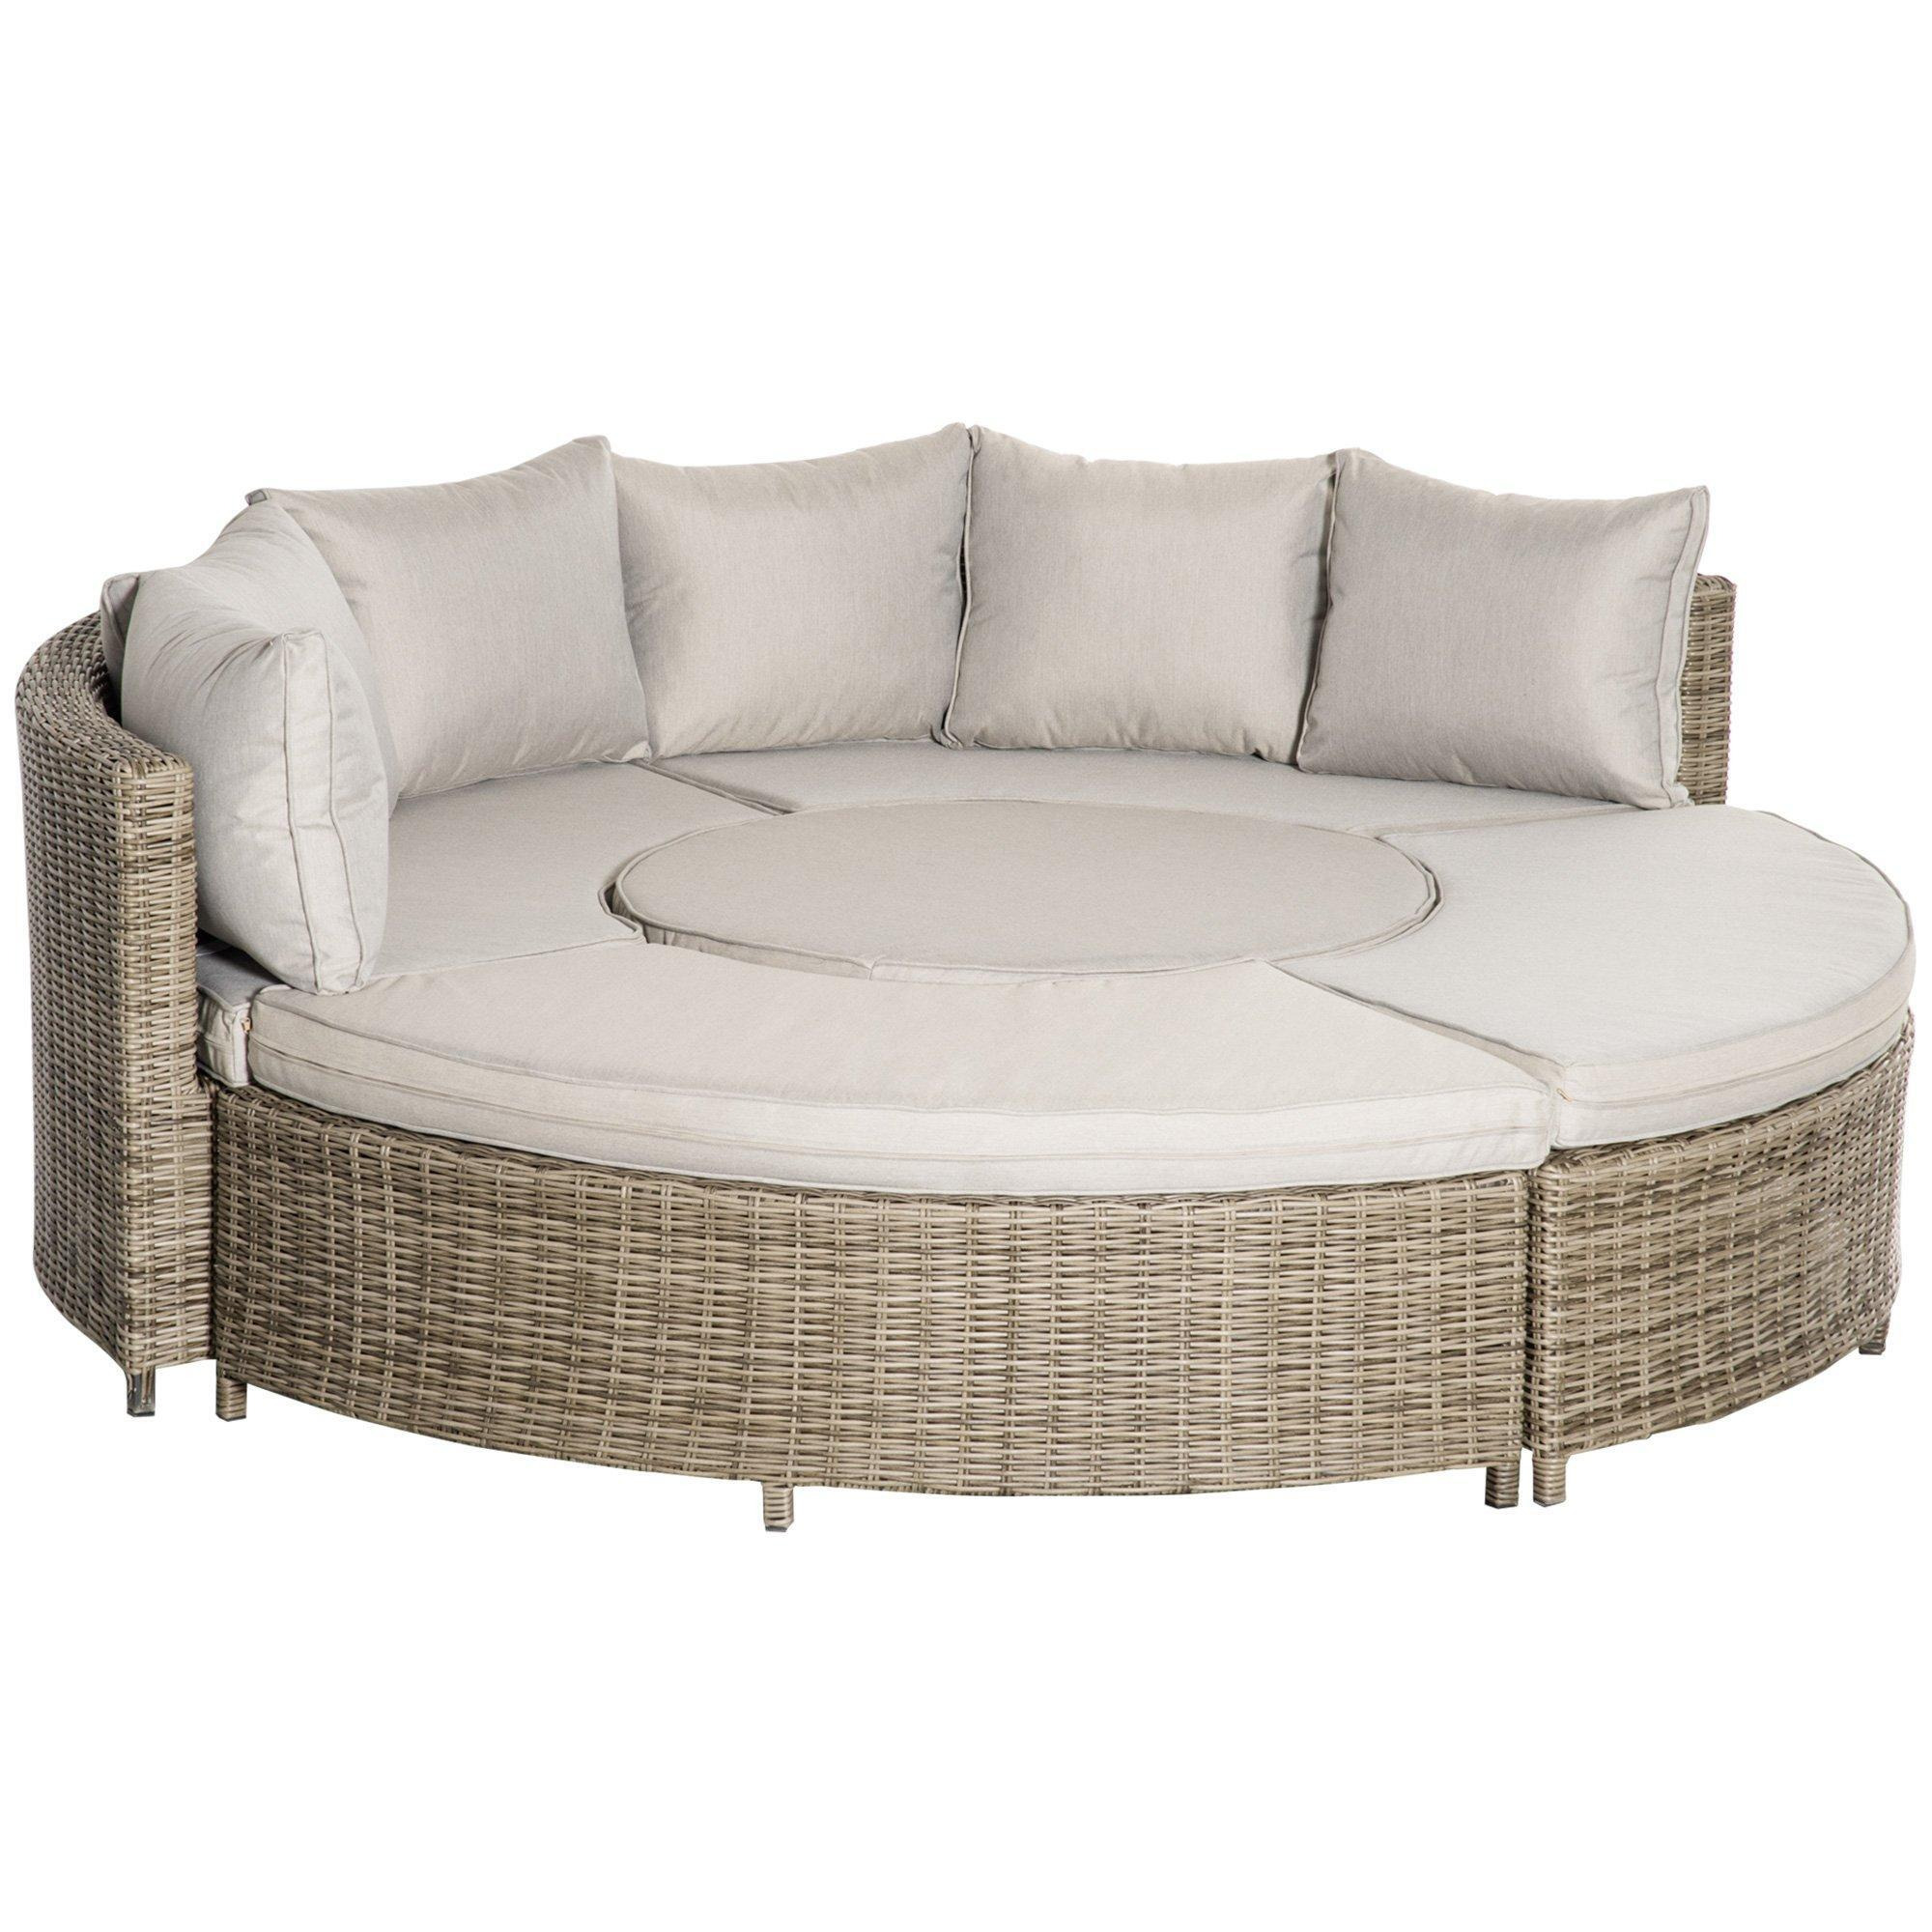 5 PCs Outdoor Rattan Lounge Chair Round Daybed Table Conversation Set w/ Cushion - image 1